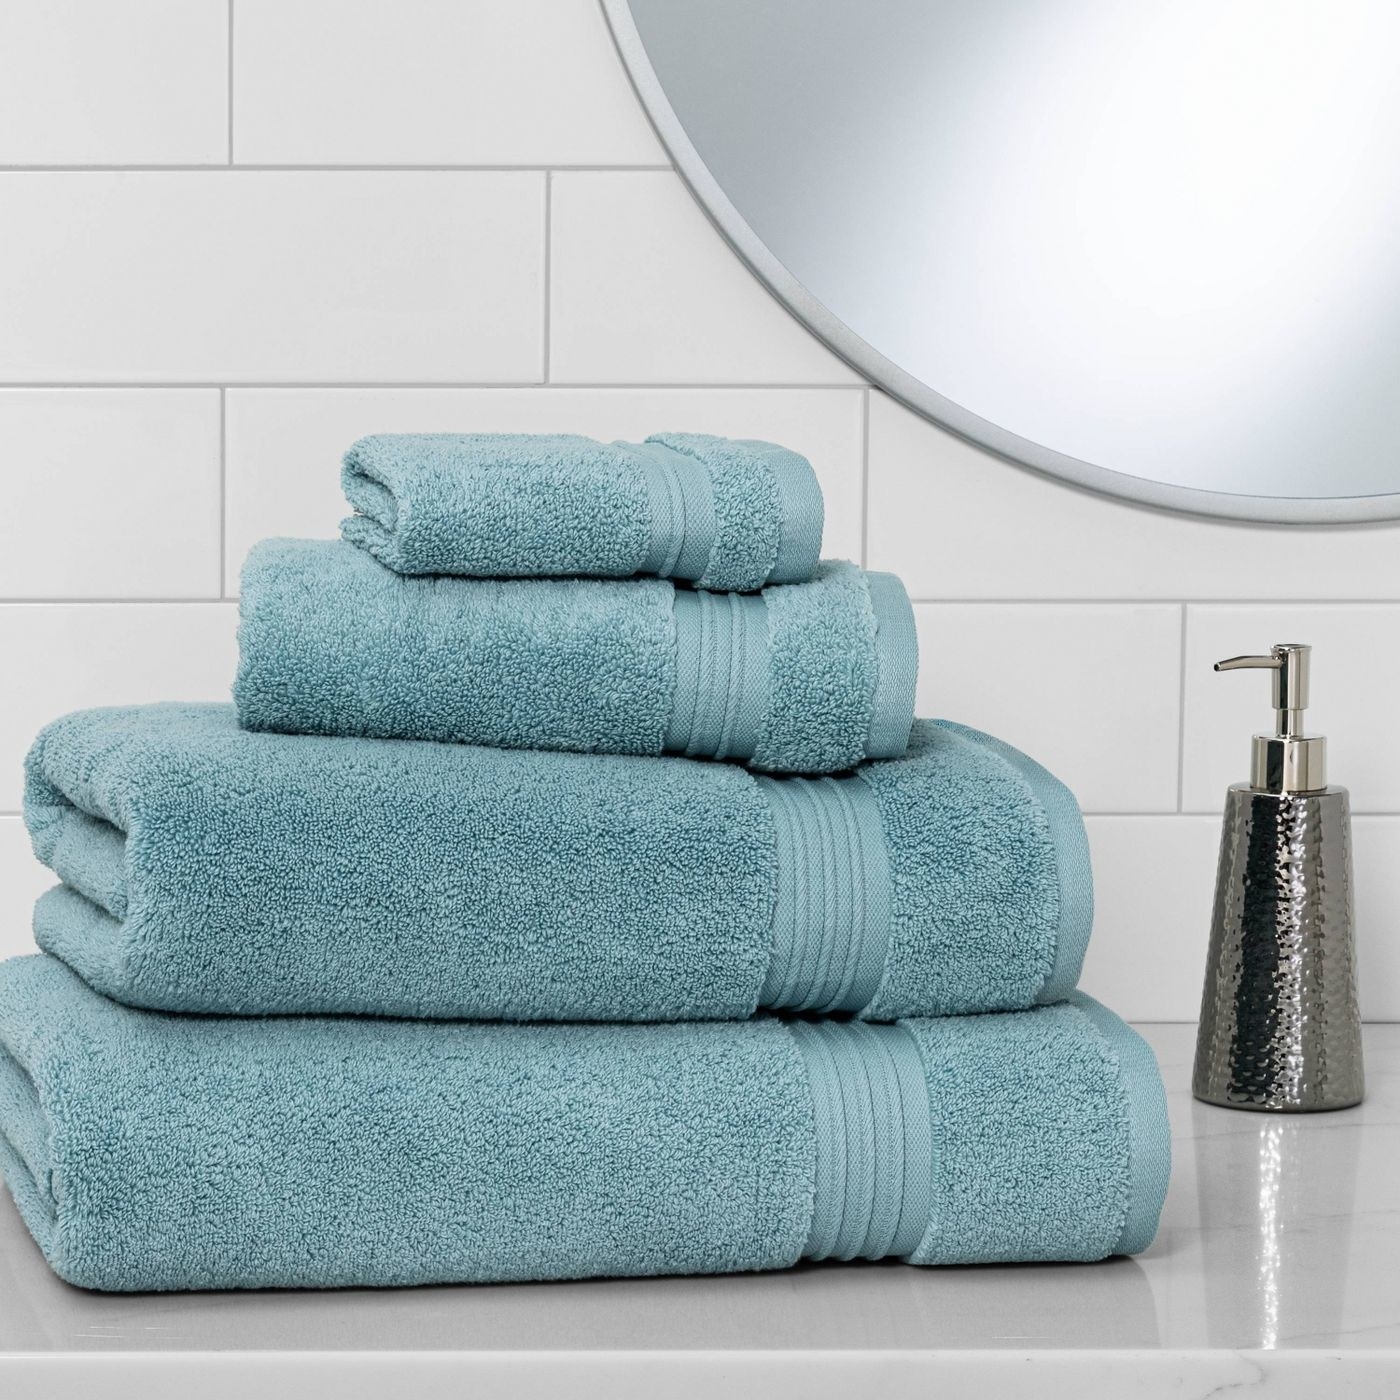 The spa bath towels in an aqua blue stacked on top of each other to show the differences in size